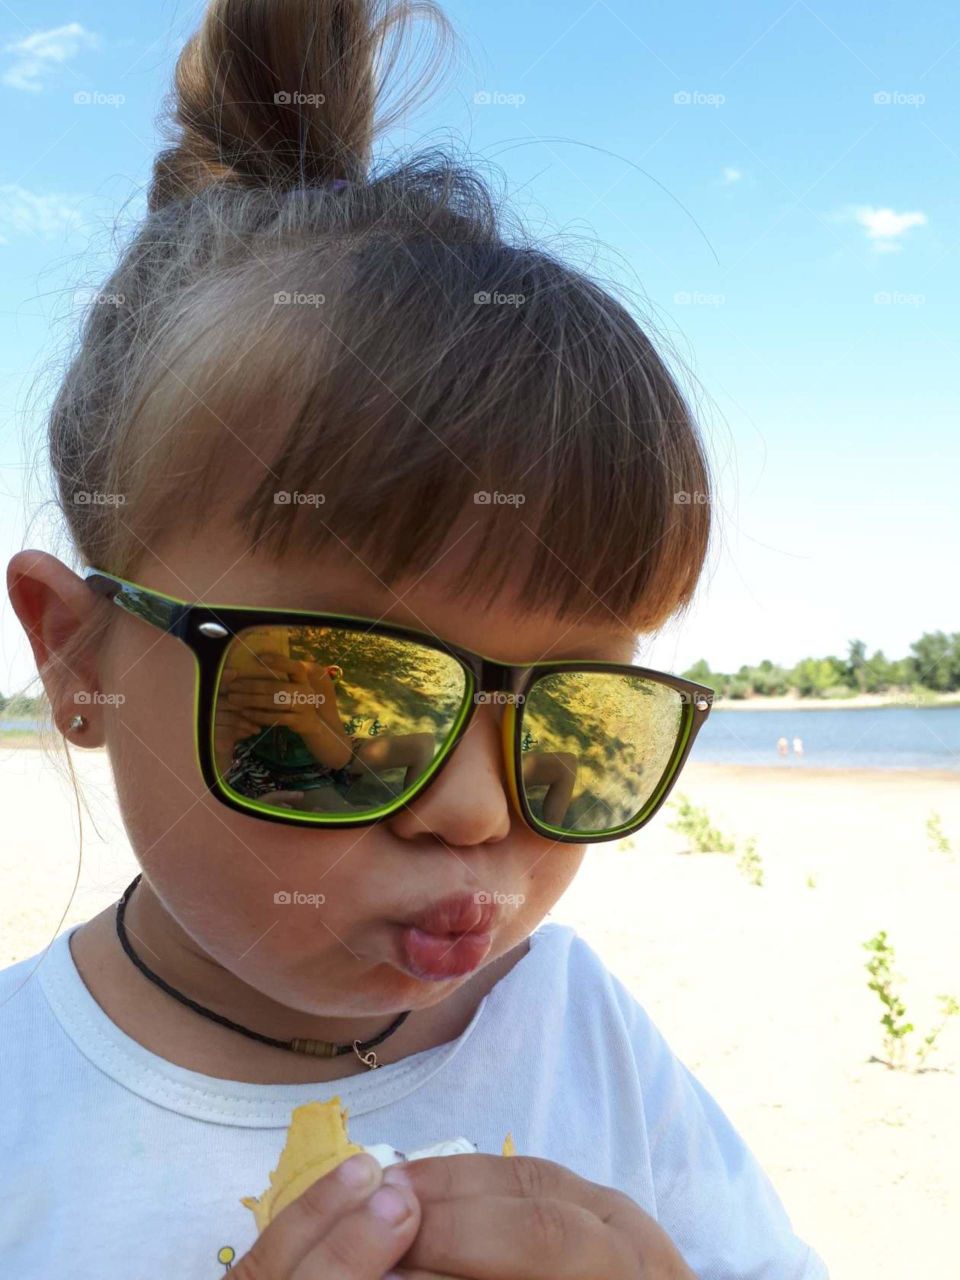 .
.
#kids #related #familyweekend #daugther #summer #love #grandma #familyreunion #instagood #family  #children #smile #love #sisters #cousinlove #cute #brothers #happy #river #fun  #photooftheday #familyiseverything #glasses #lif